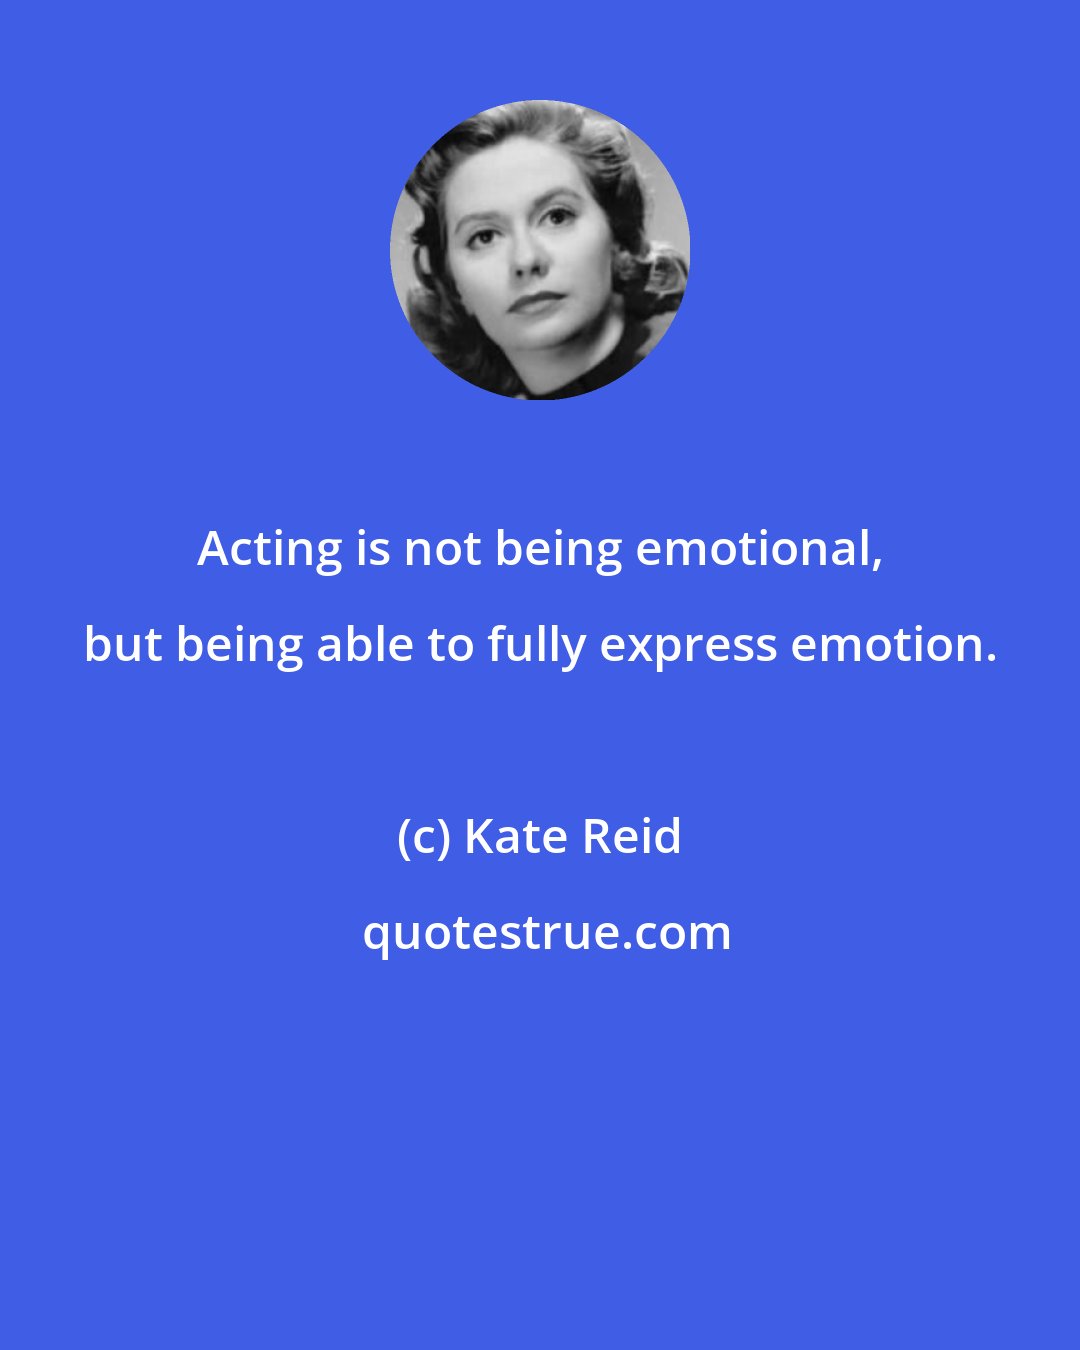 Kate Reid: Acting is not being emotional, but being able to fully express emotion.